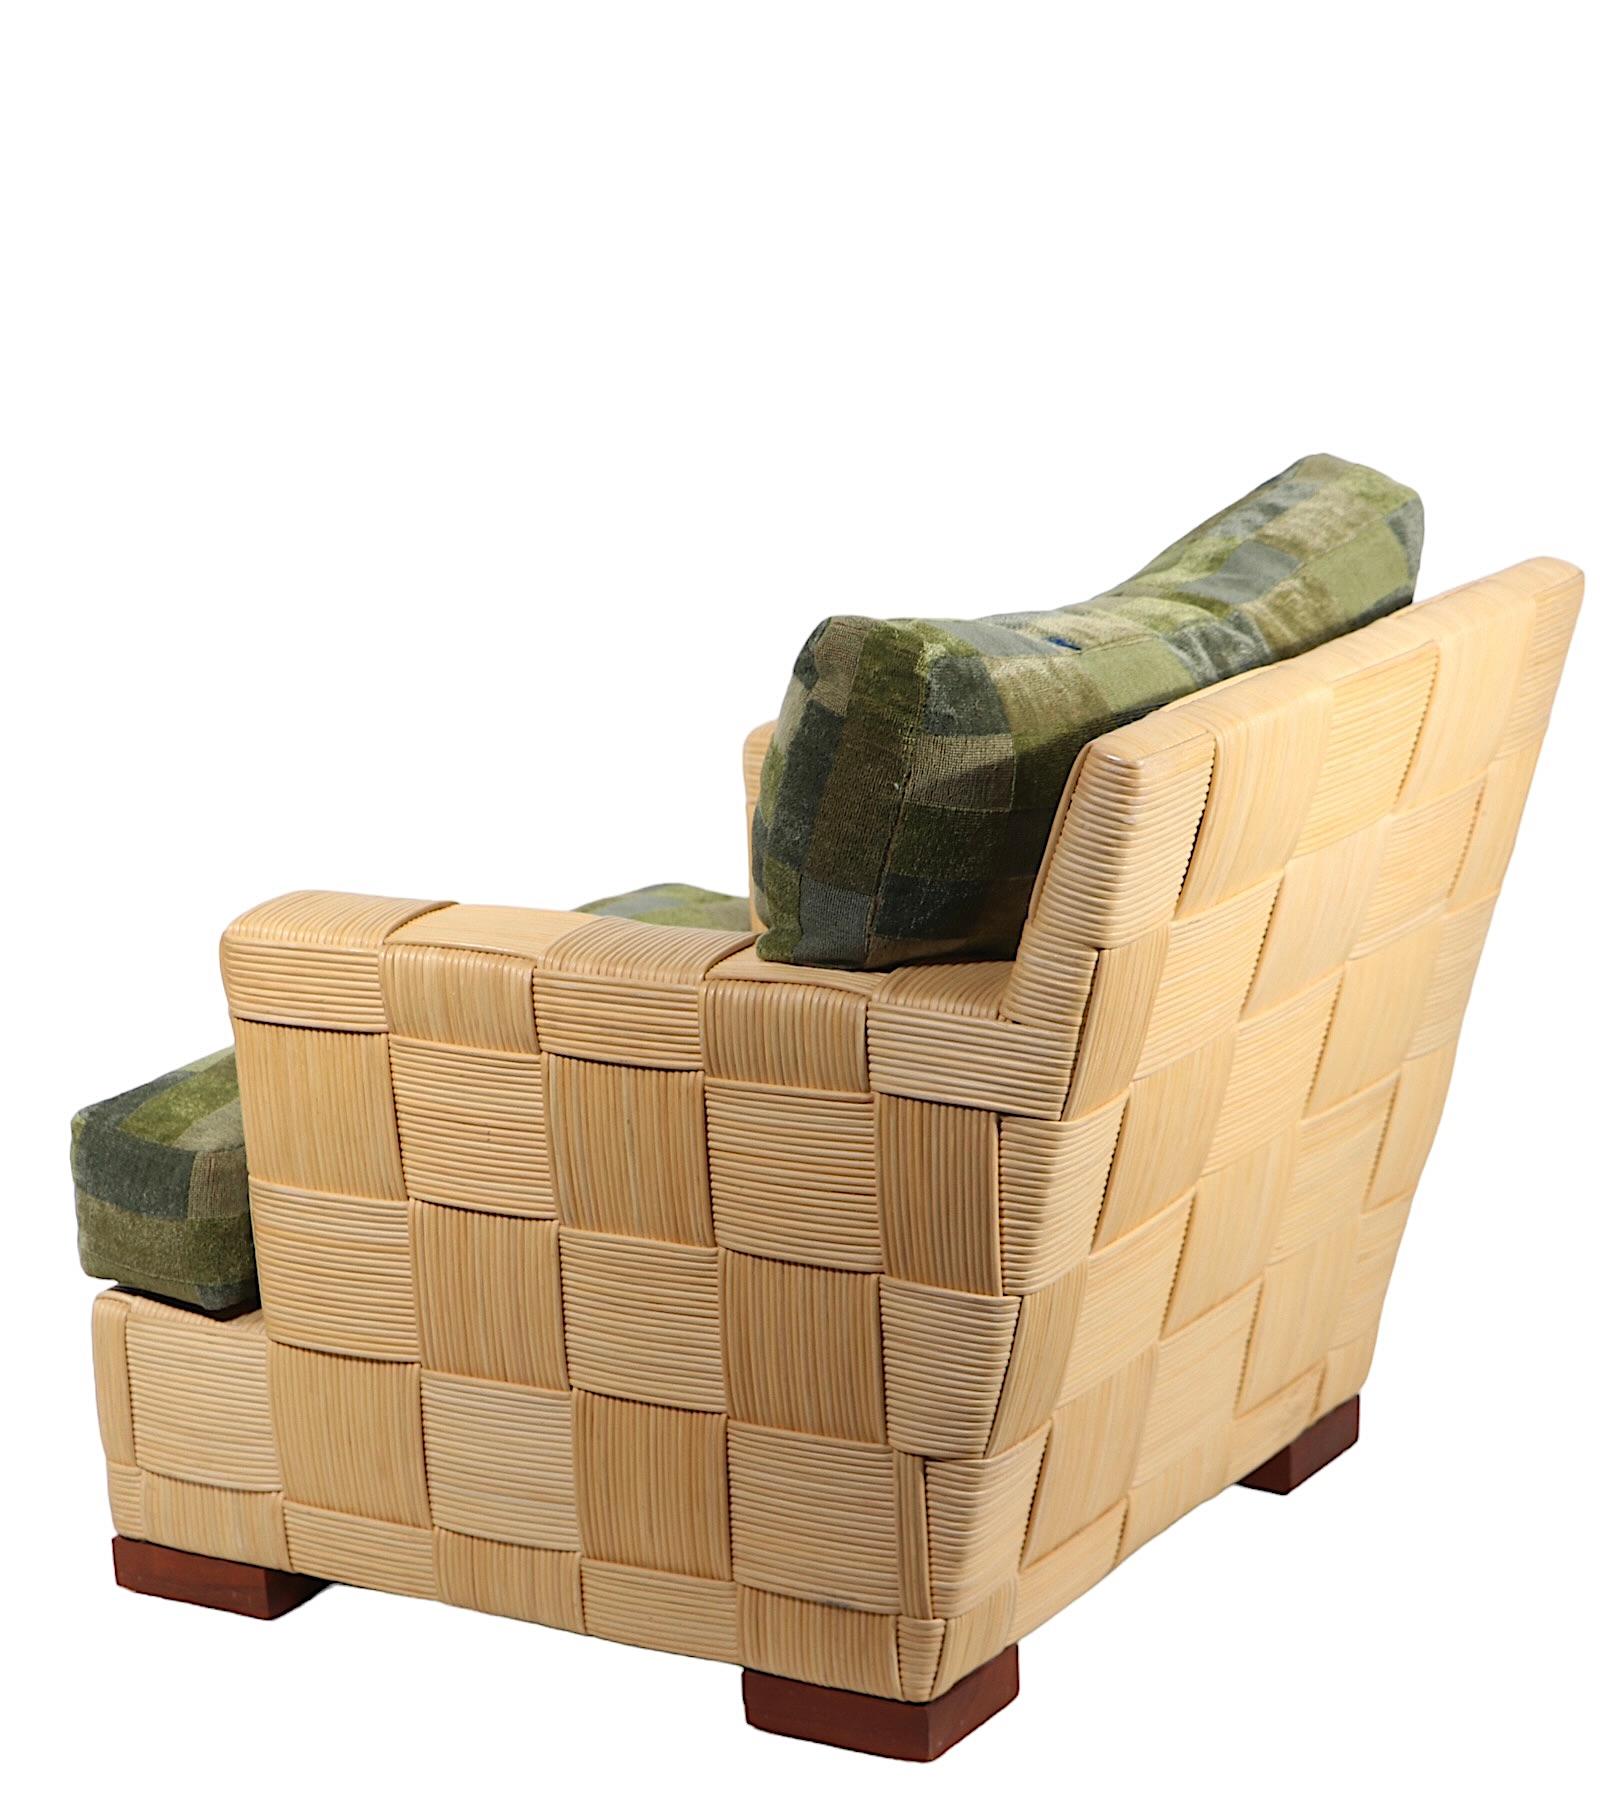 Chic, voguish, sophisticated Block Island  club chair designed by John Hutton for Donghia, circa 1990's. The chair features a  woven rattan patchwork pattern surface, on mahogany feet, with original block pattern seat and back cushions. 
 The Block